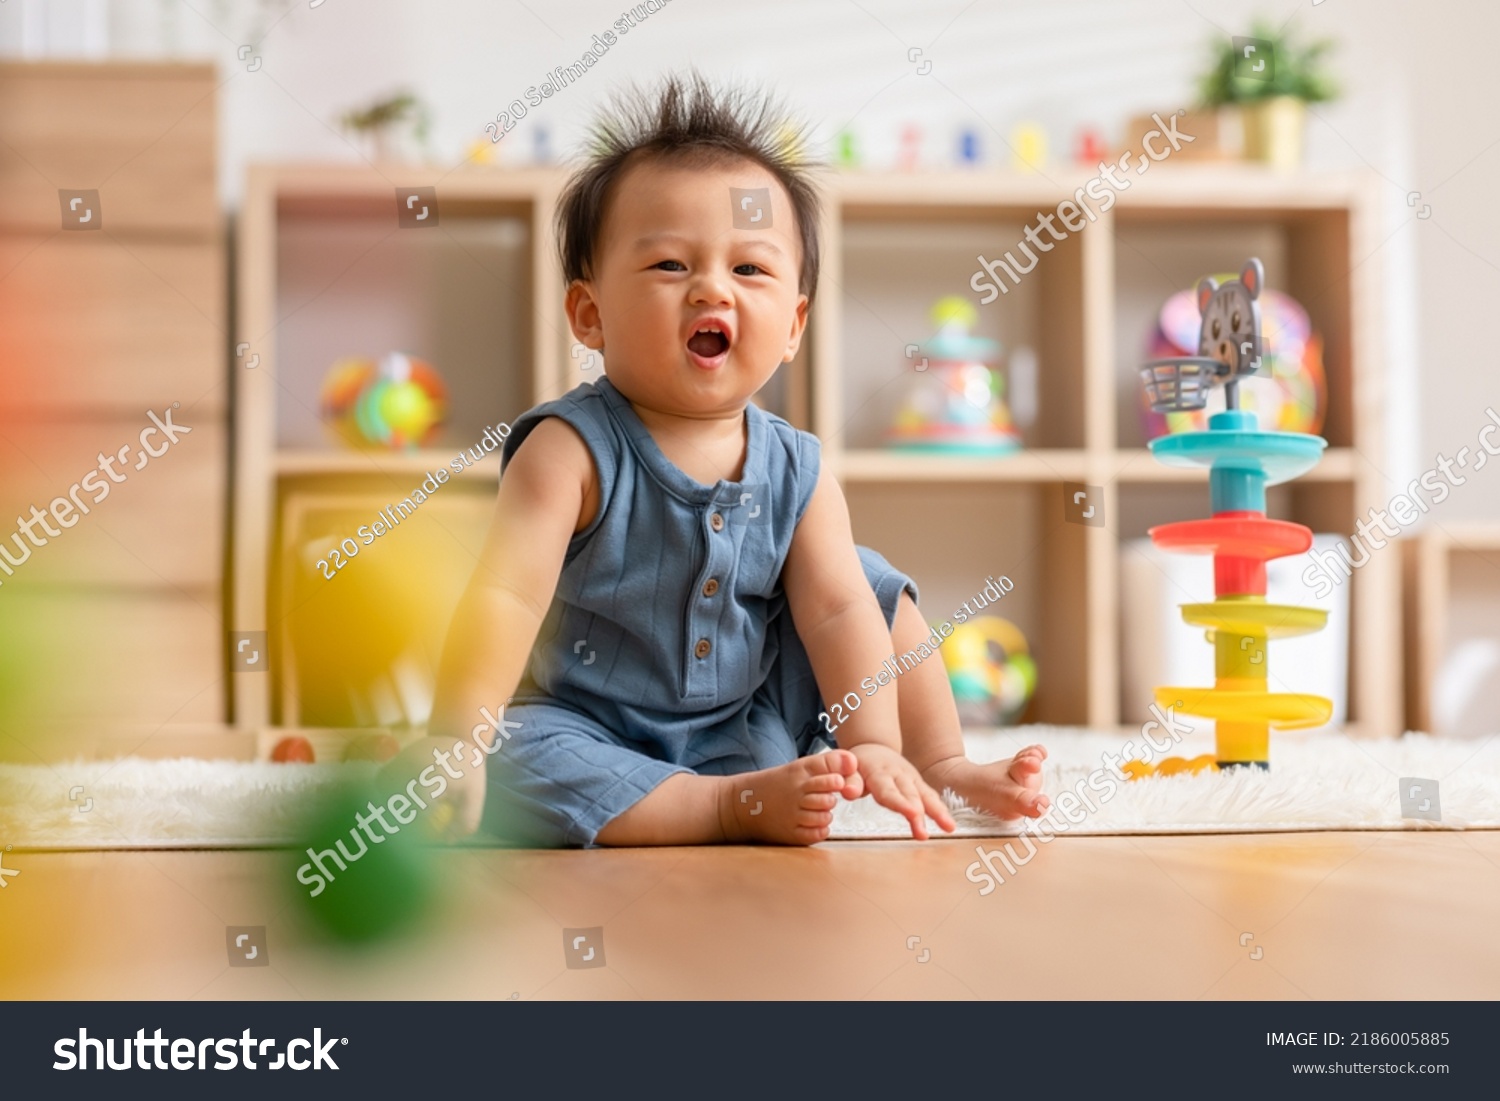 Cute Asian baby playing educational toys to learning and develop skill at home. Adorable cheerful baby toddler enjoy with toys in Nursery. Development skill in baby concept #2186005885